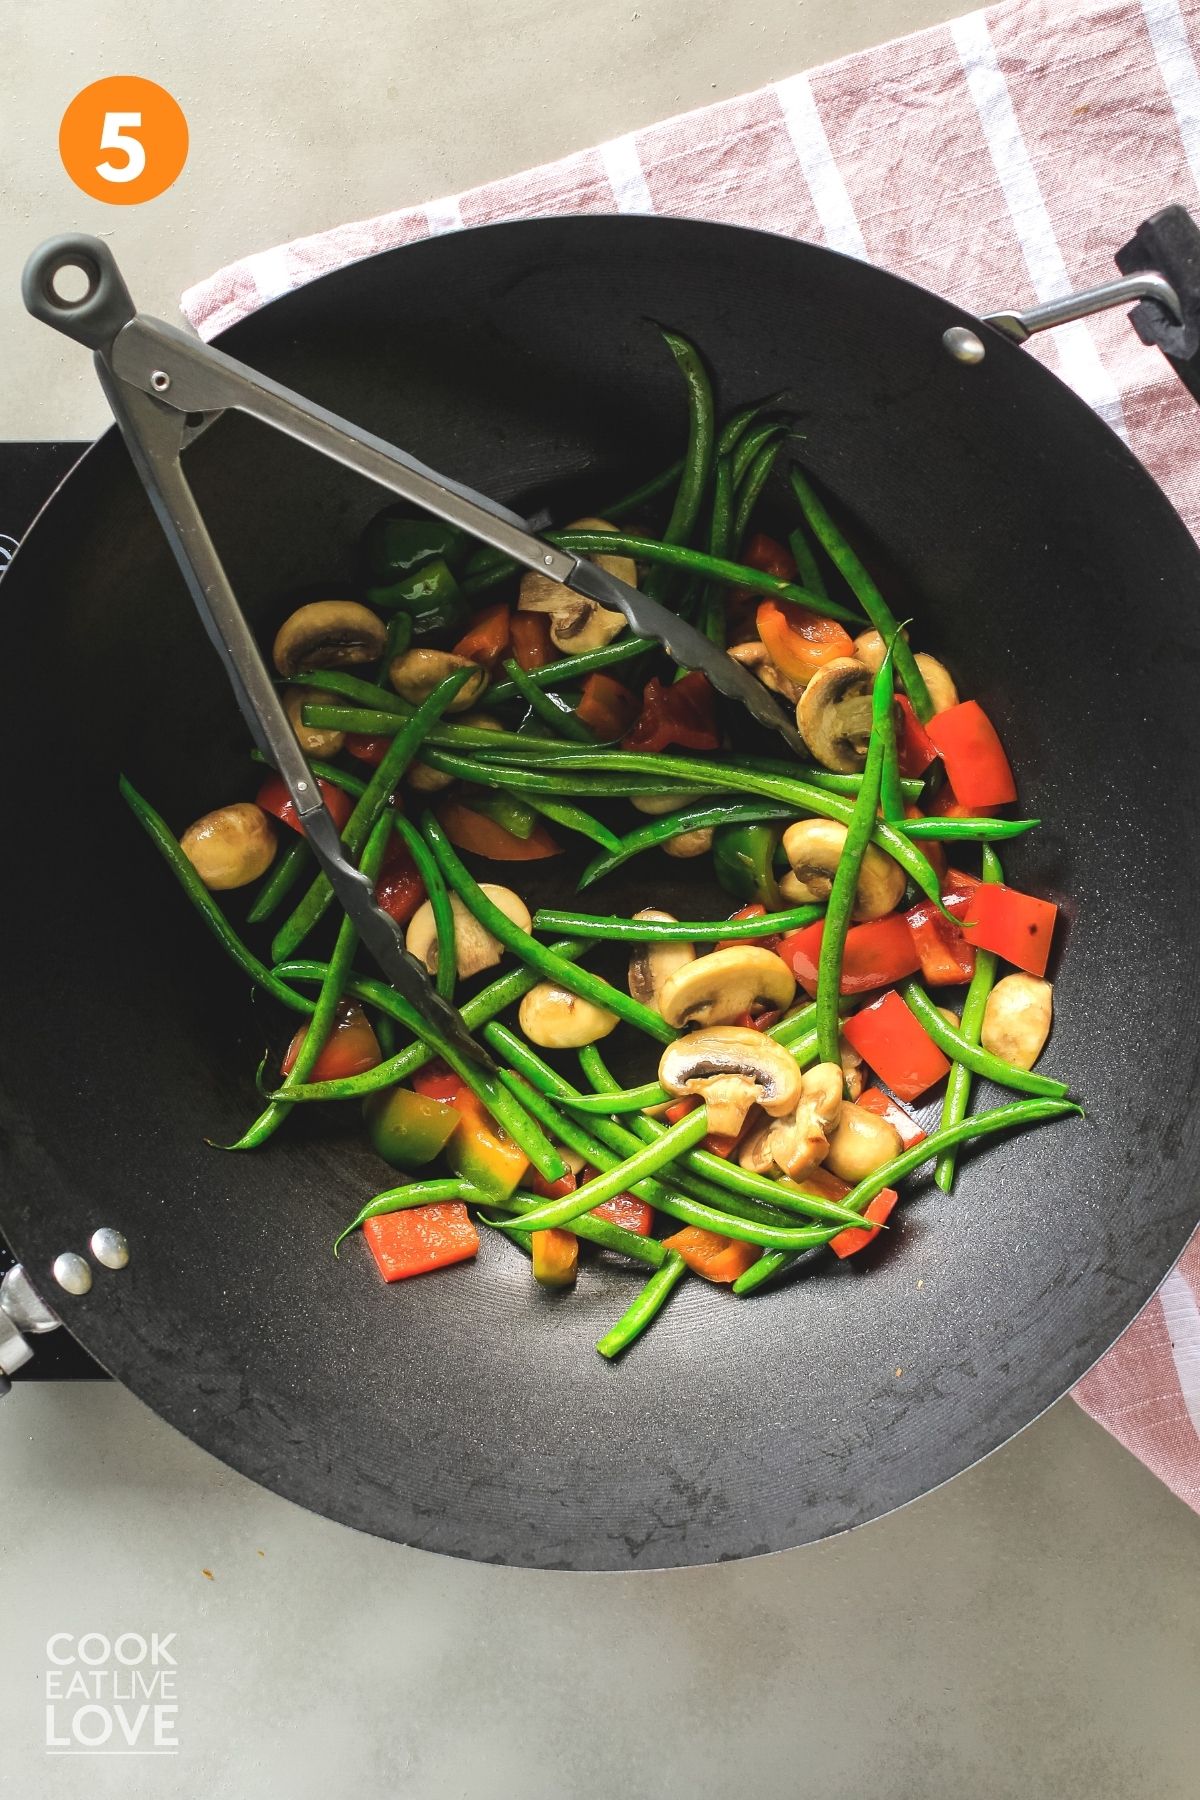 Vegetables are cooked in a wok.